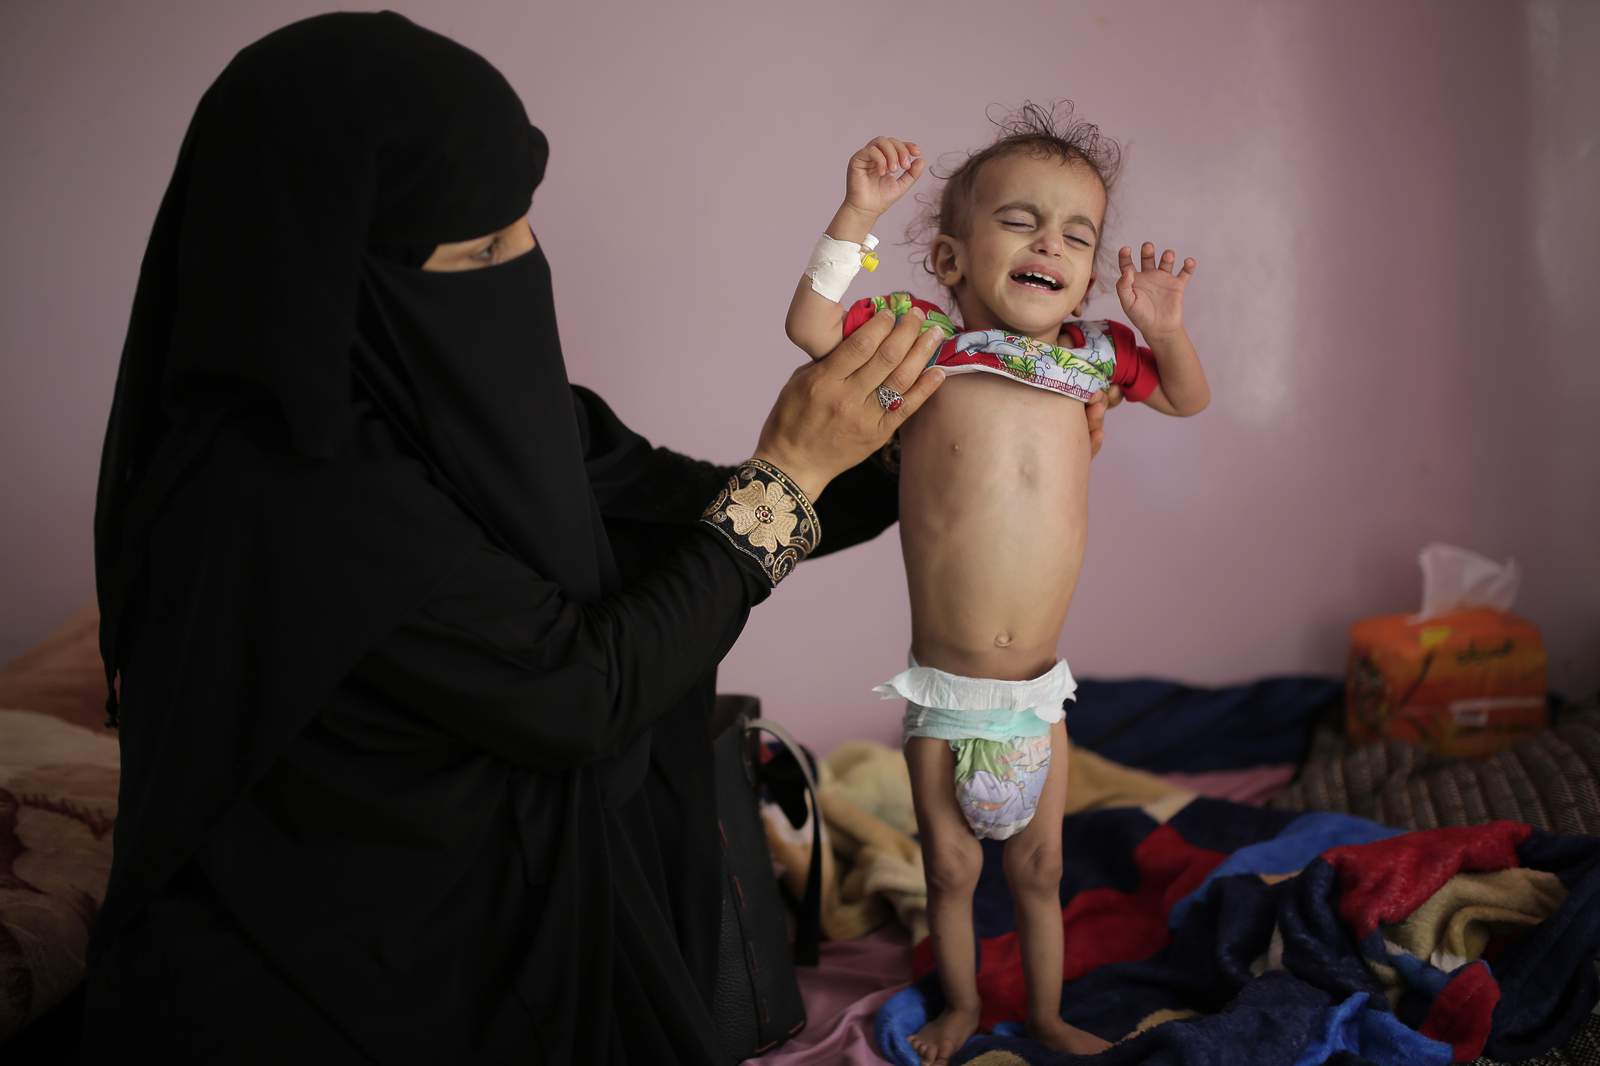 'This is hell': UN food aid chief visits Yemen, fears famine